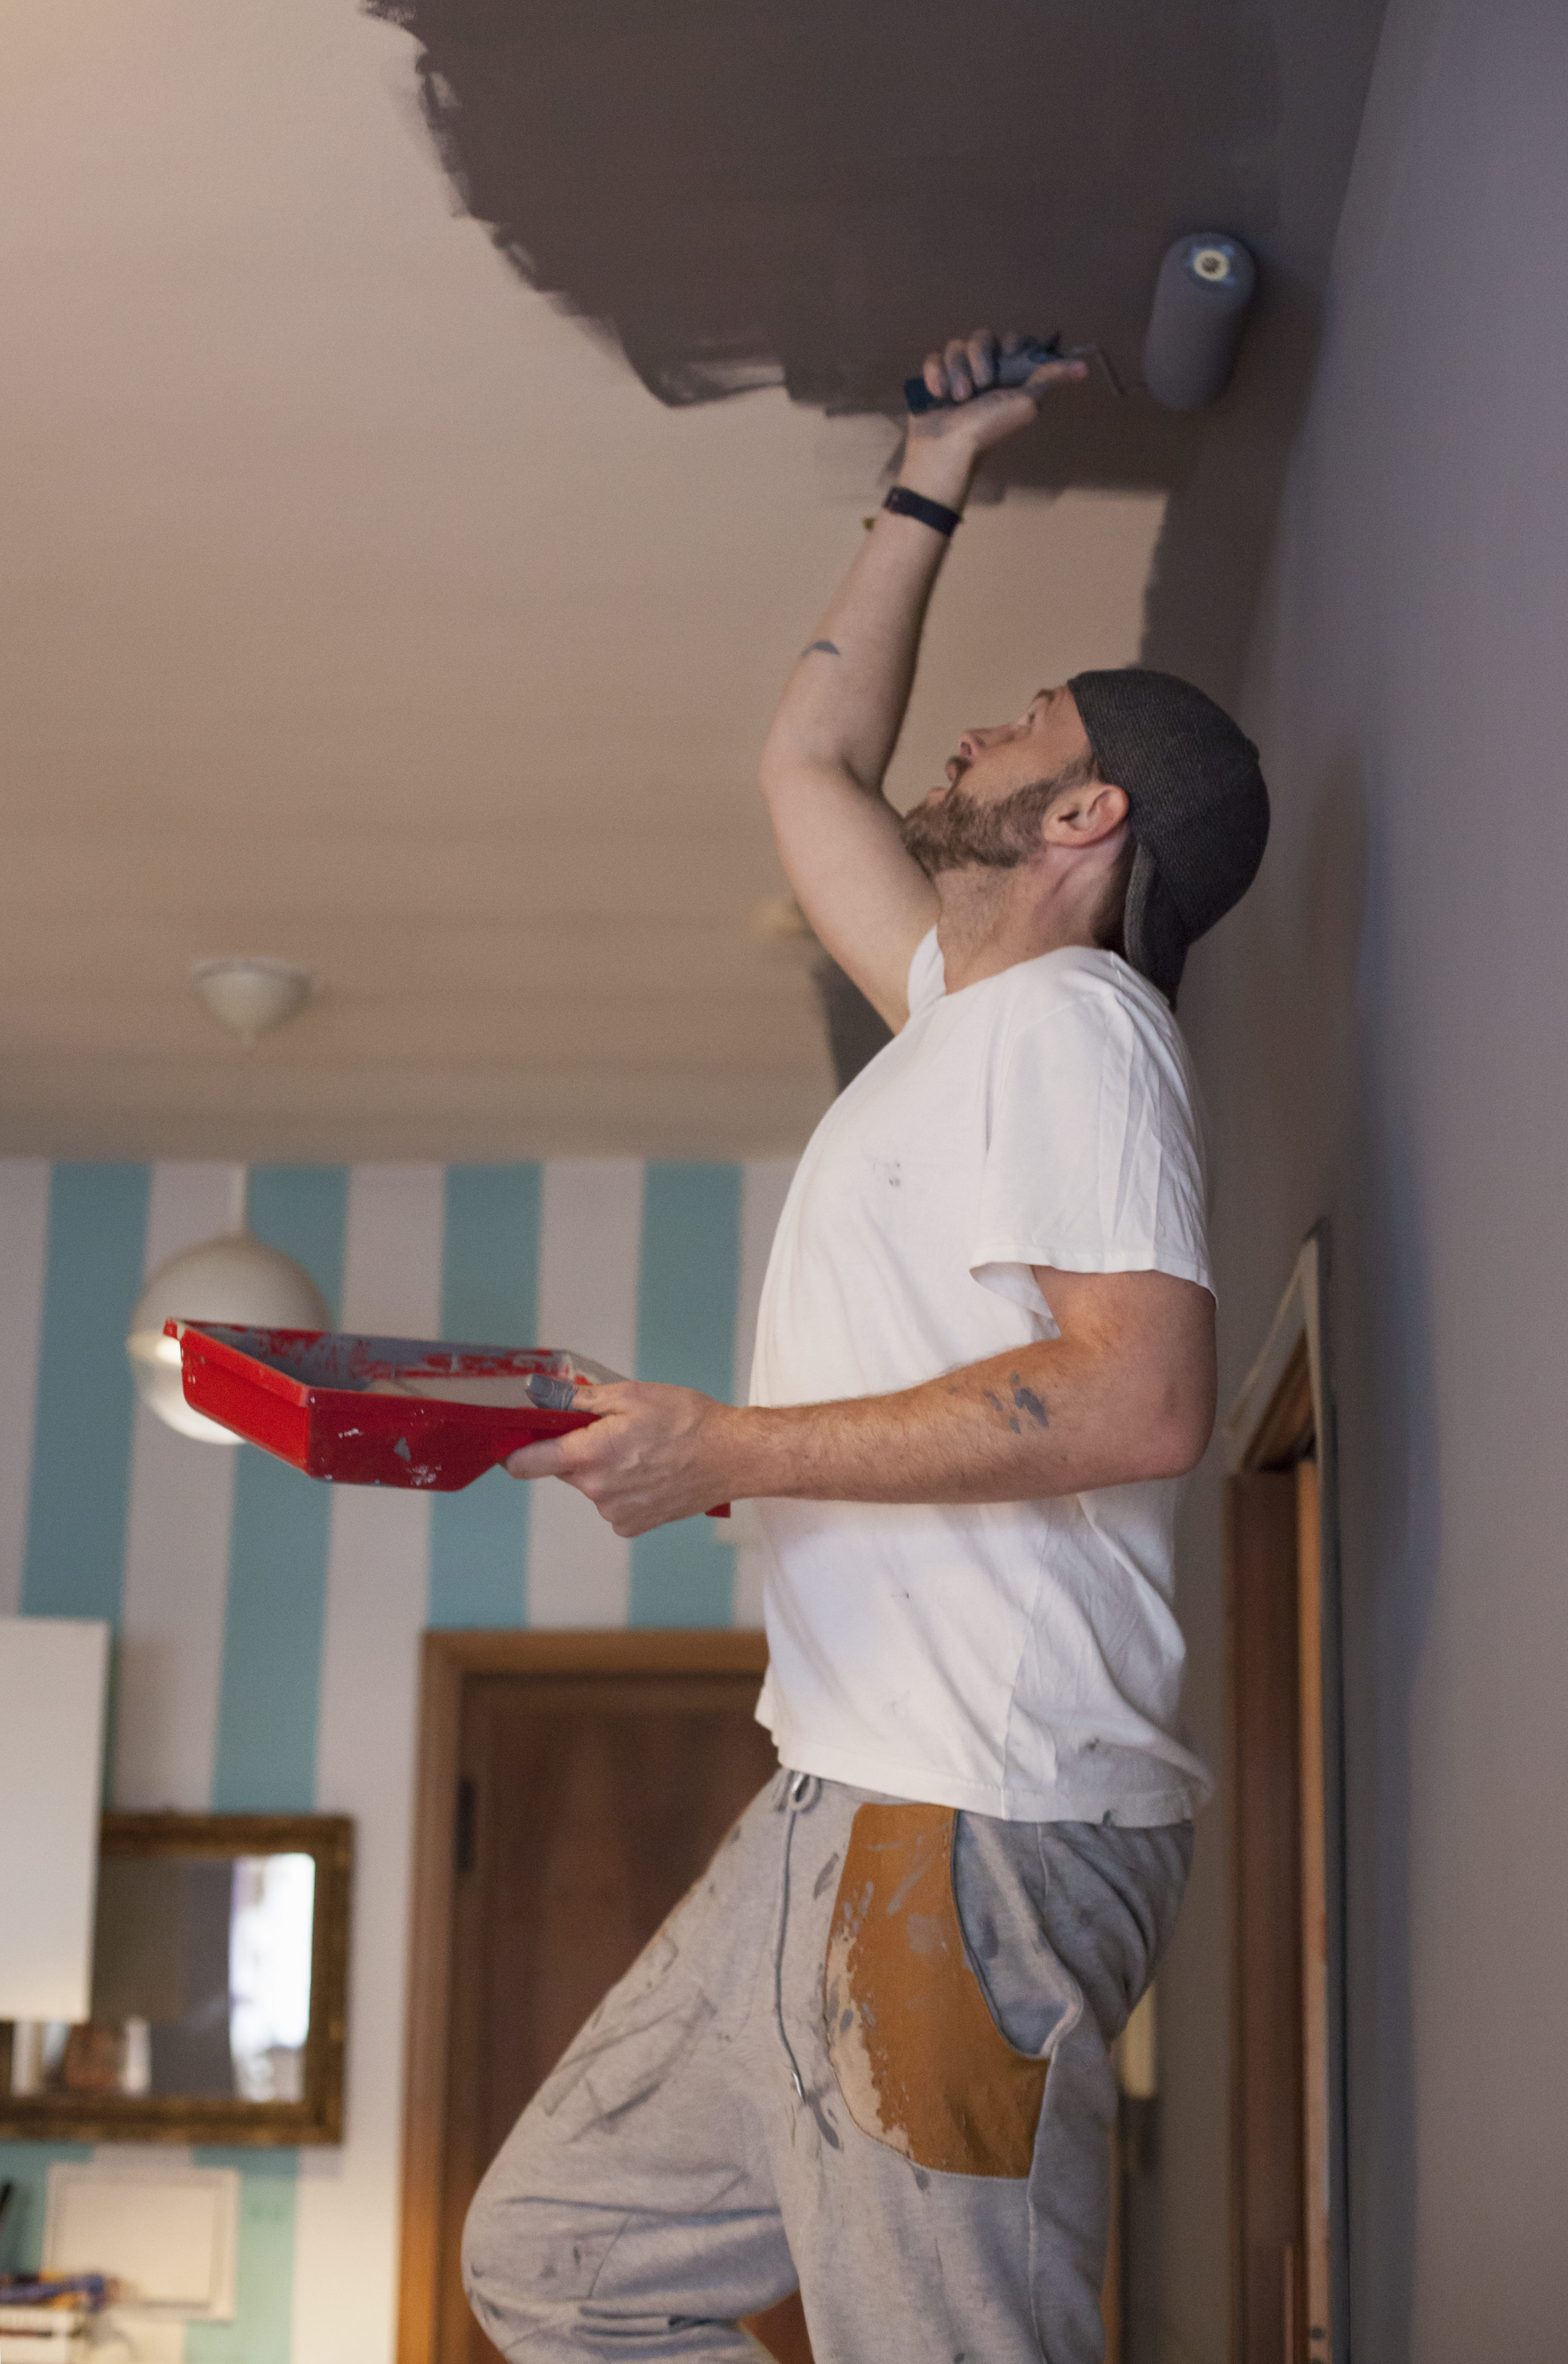 Man painting ceiling with roller, wearing a white shirt and speckled pants, indoors